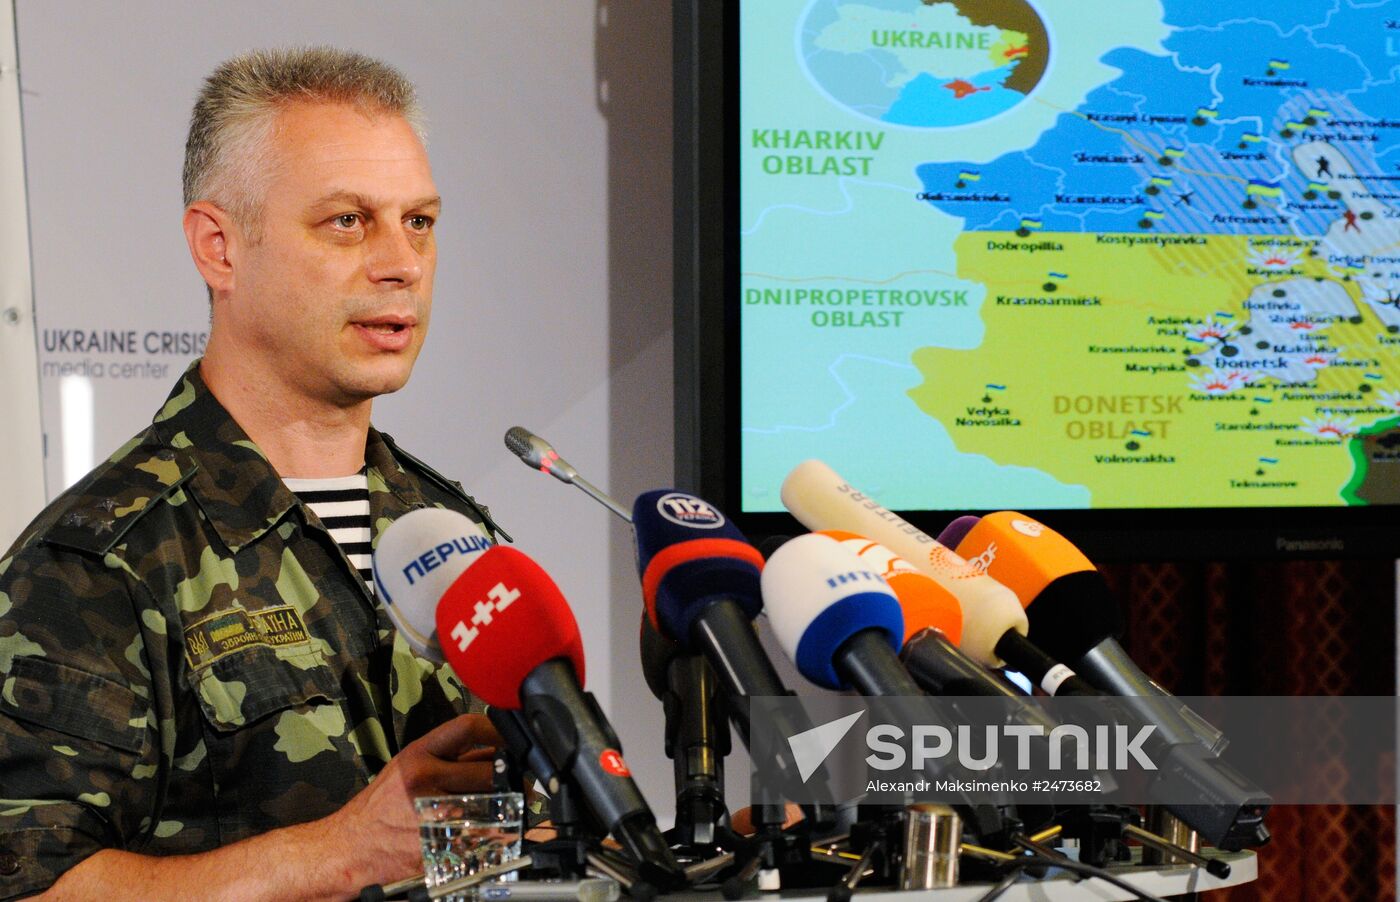 Press briefing by Andriy Lysenko, Ukrainian Council of National Security and Defense